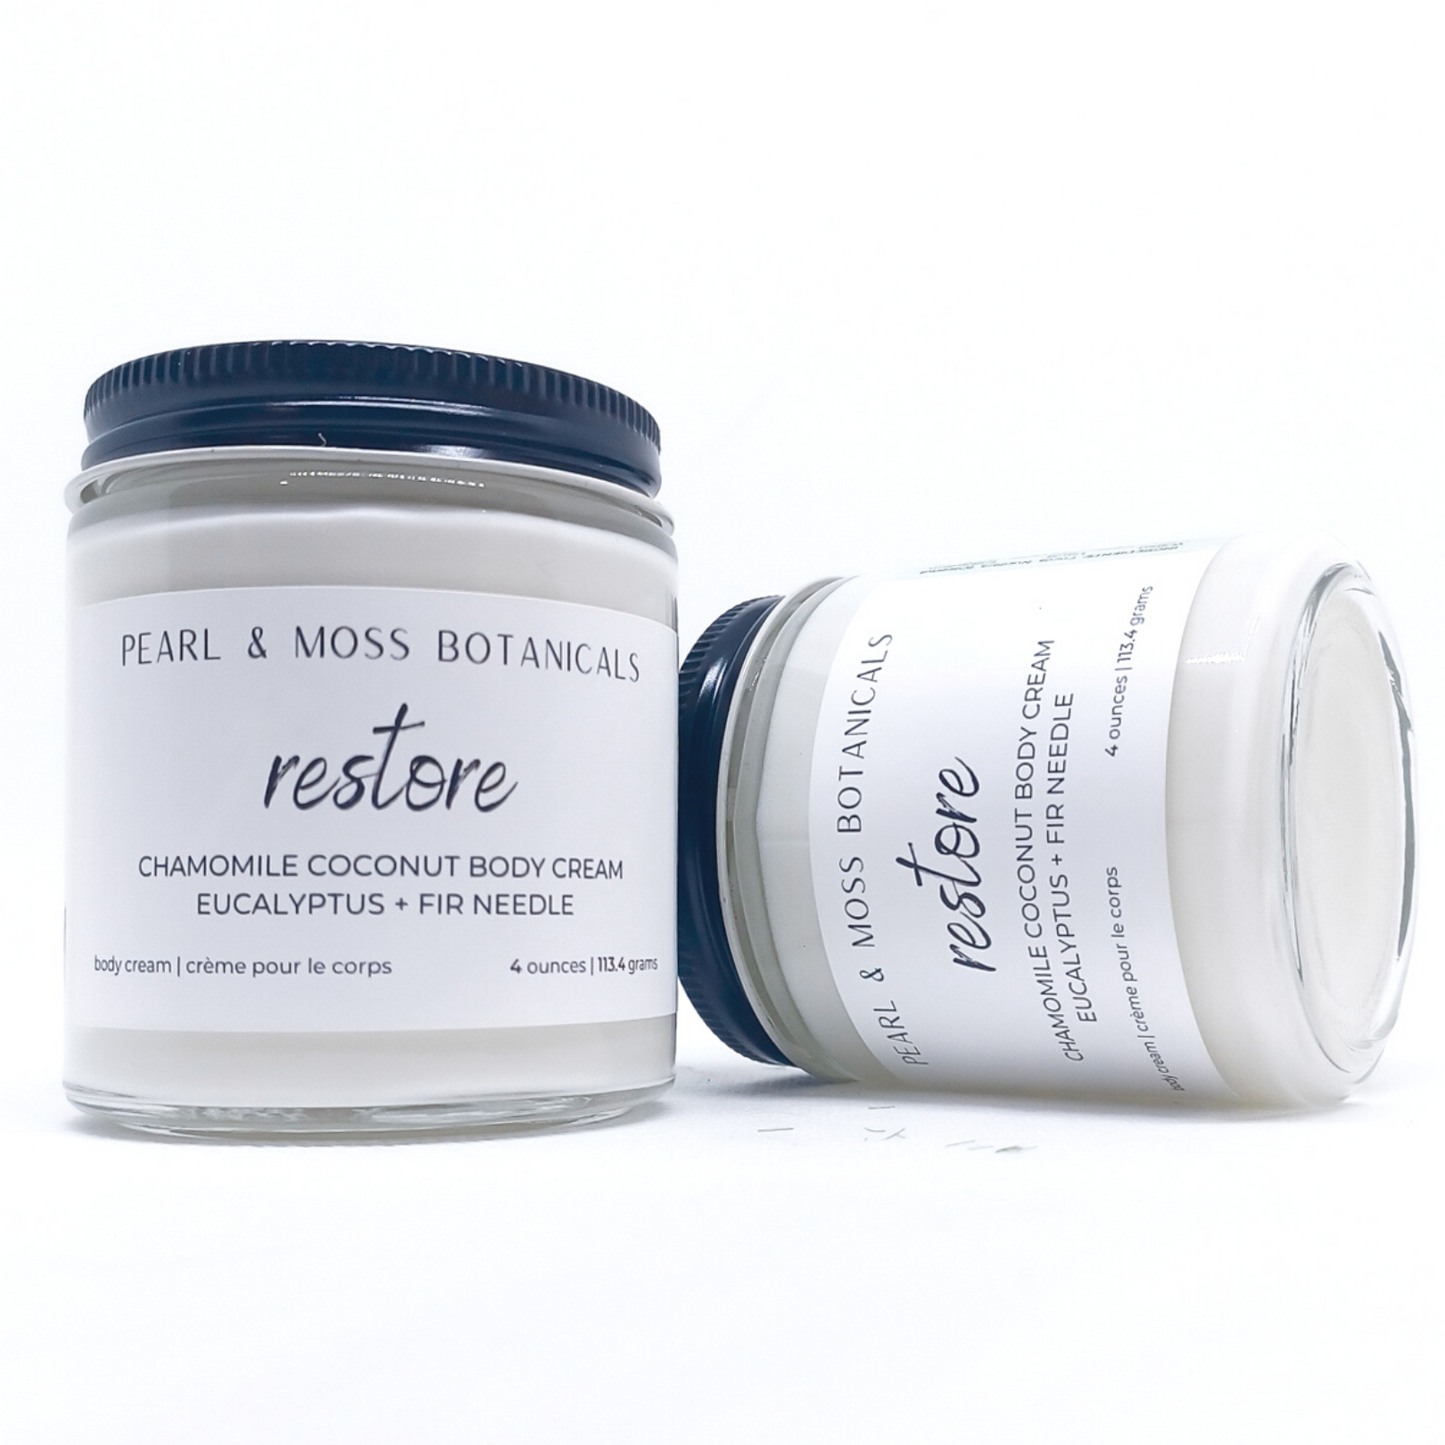 RESTORE: Fresh, woodsy and medicinal, the RESTORE blend features essential oils of fir needle and eucalyptus.  Light and smooth, the Chamomile Coconut Body Cream is softening and conditioning for the skin, with extra soothing effects from chamomile extract. Rich and luxurious, tucuma and babassu butter shine in this body cream, bringing a velvety smooth finish to your skin, while providing delicious hydration to your skin, courtesy of coconut water.